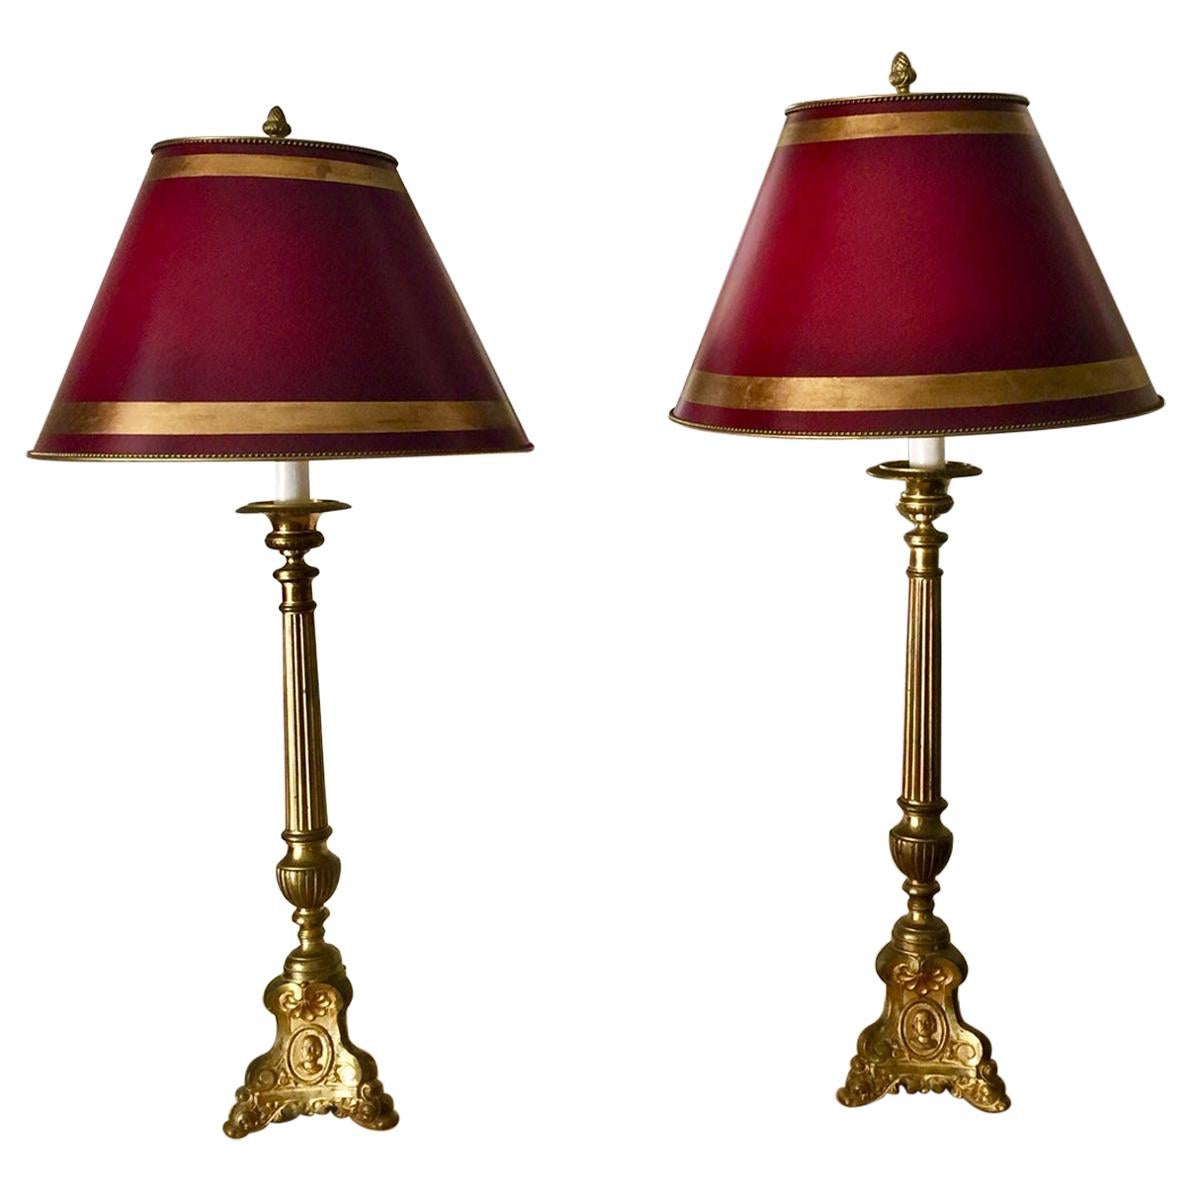 French Pair of Column Lamps with Burgundy Red Parchment Shades